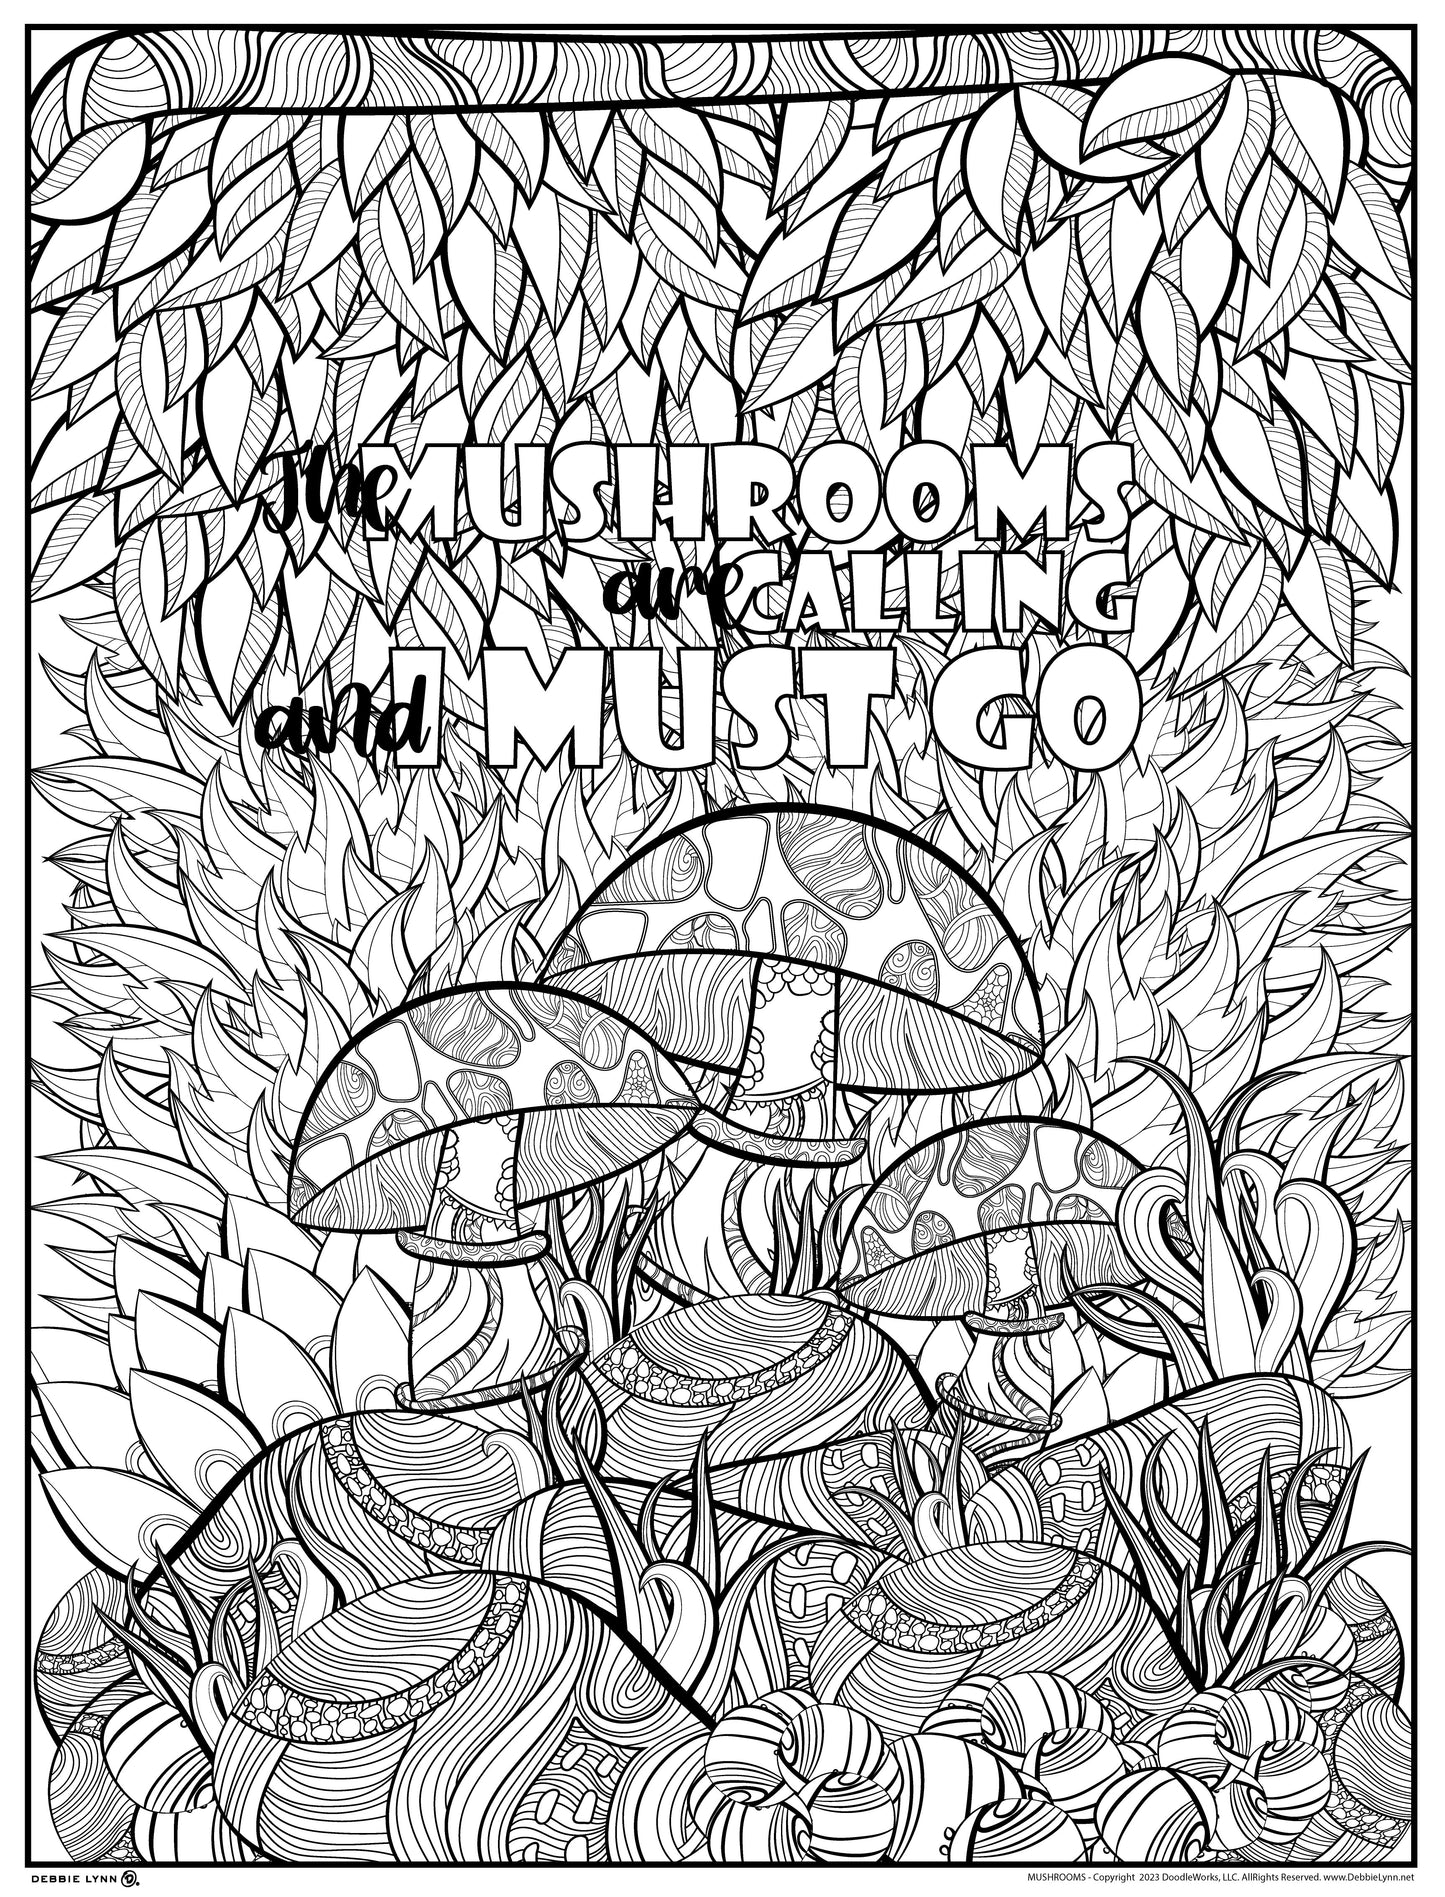 Mushrooms Personalized Giant Coloring Poster 46"x60"